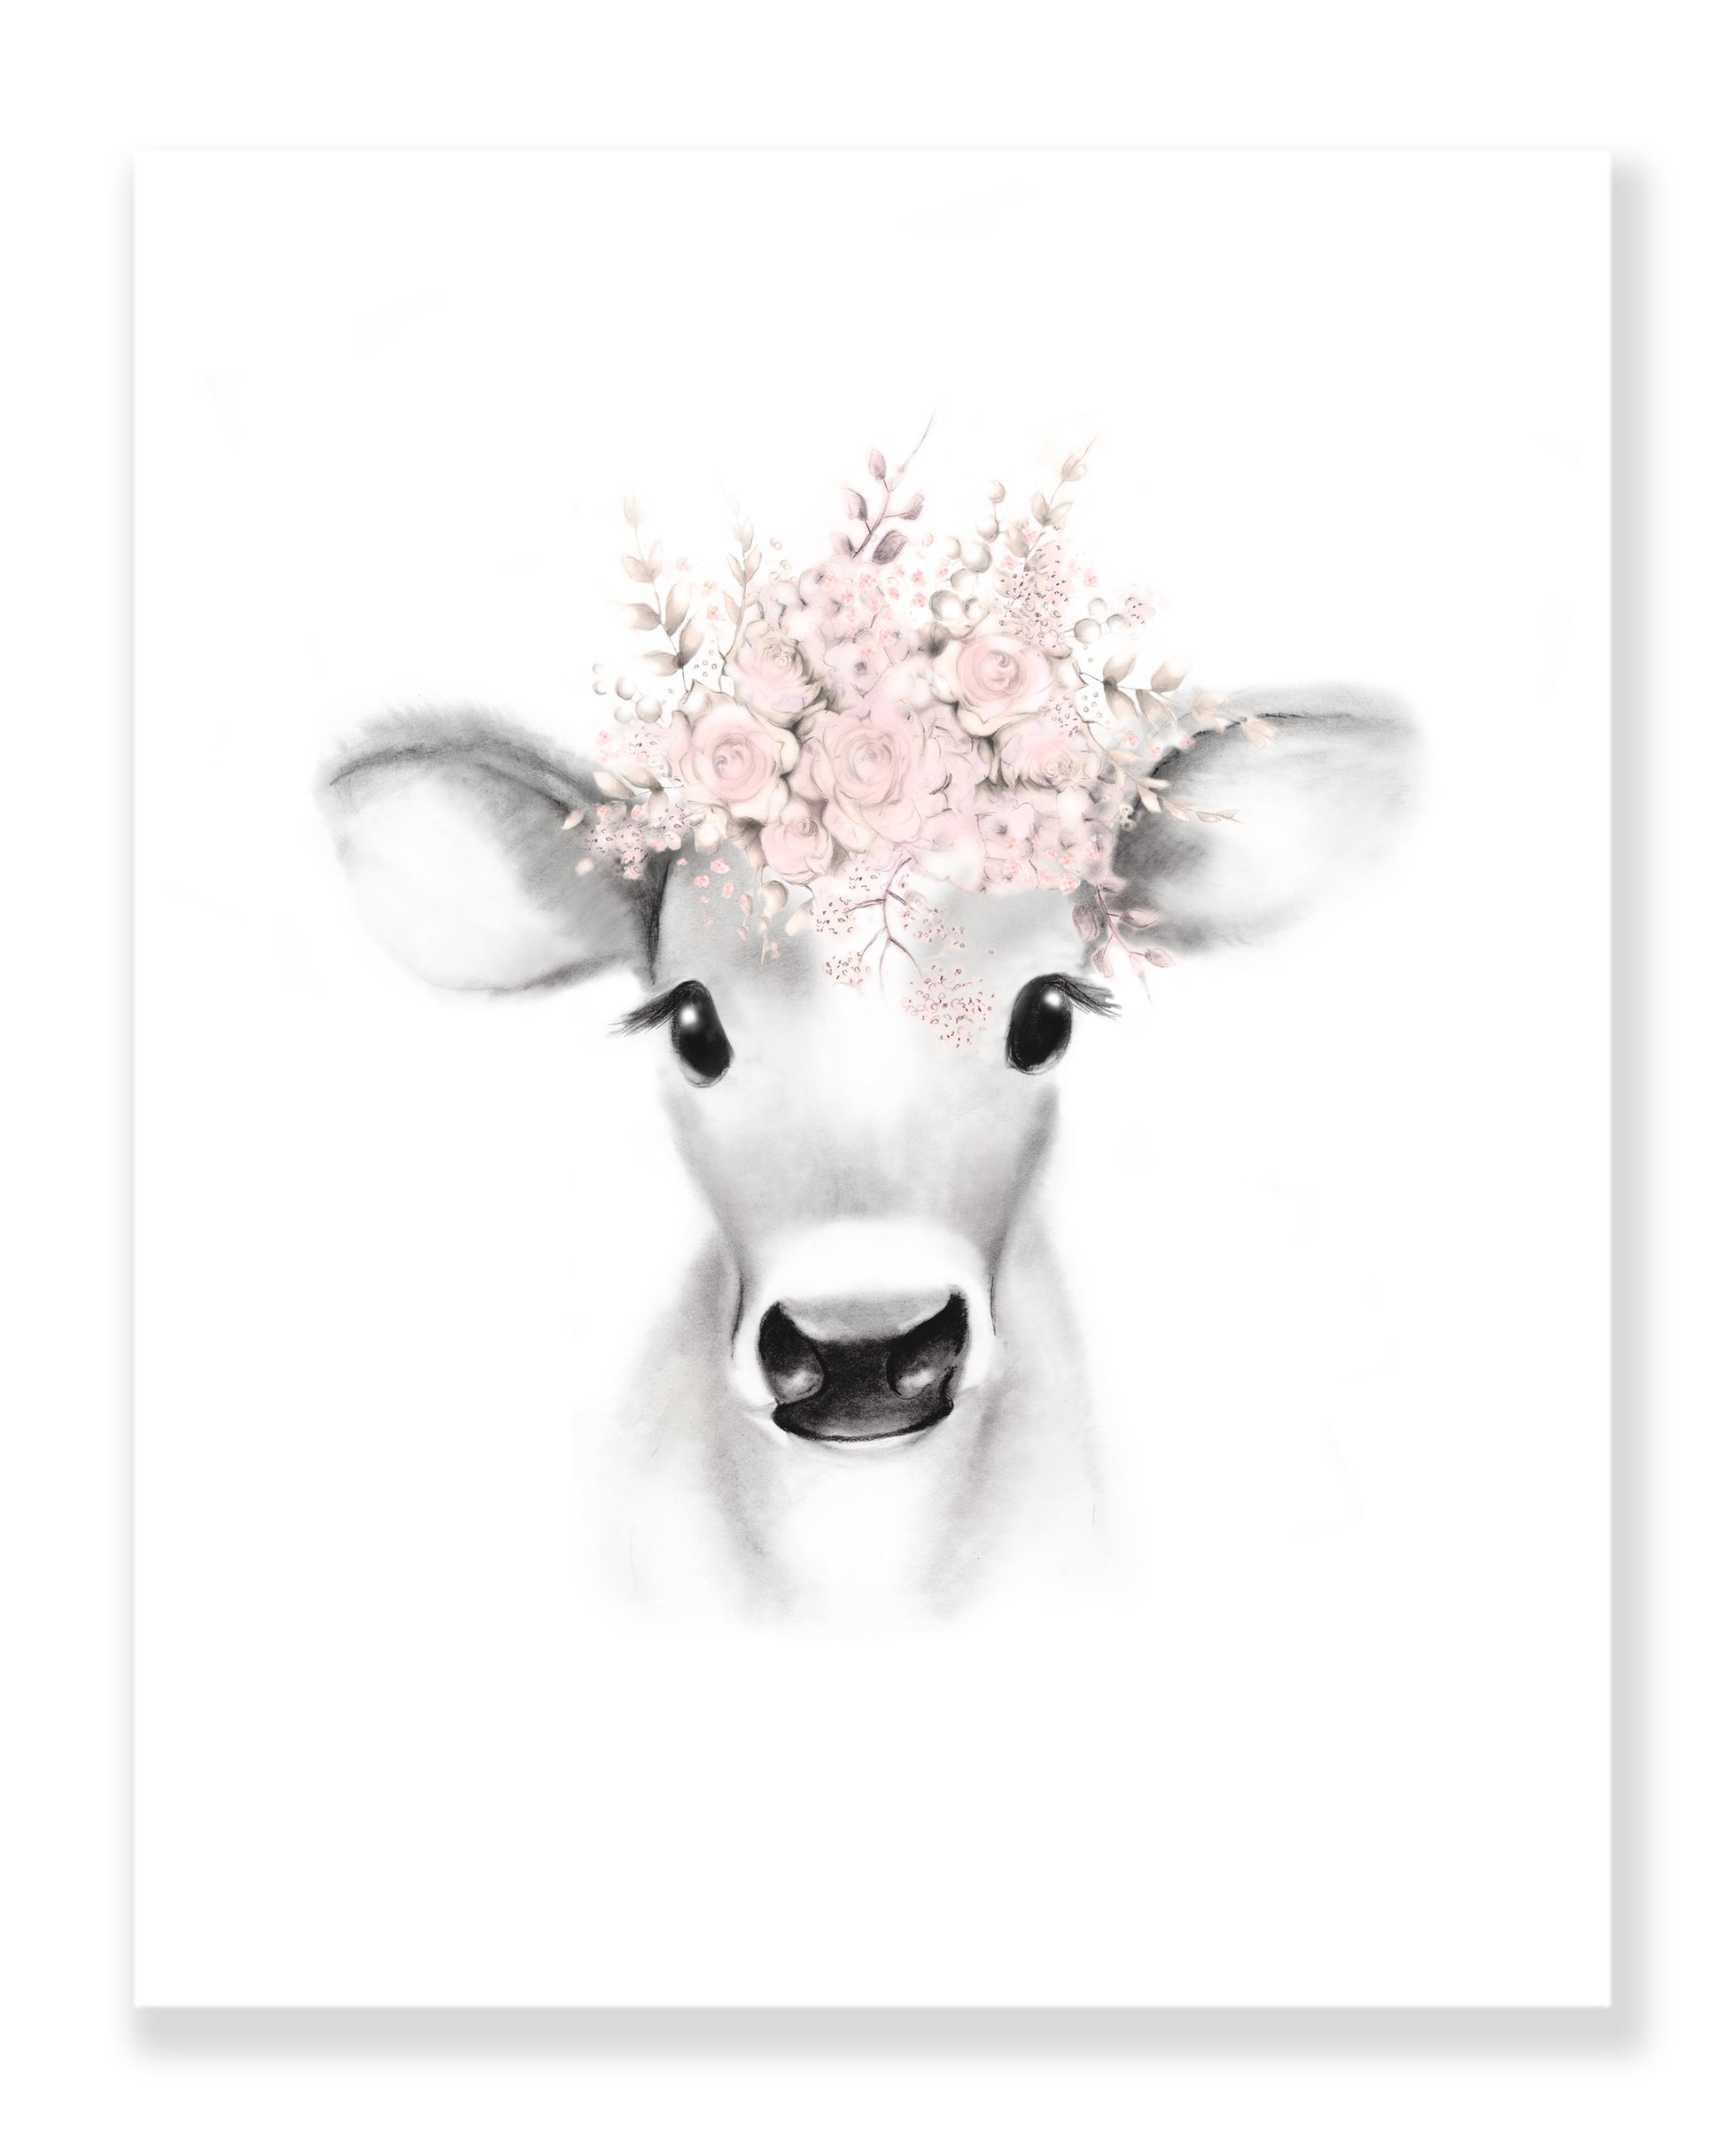 Cow with Floral Crown Print - Studio Q - Art by Nicky Quartermaine Scott